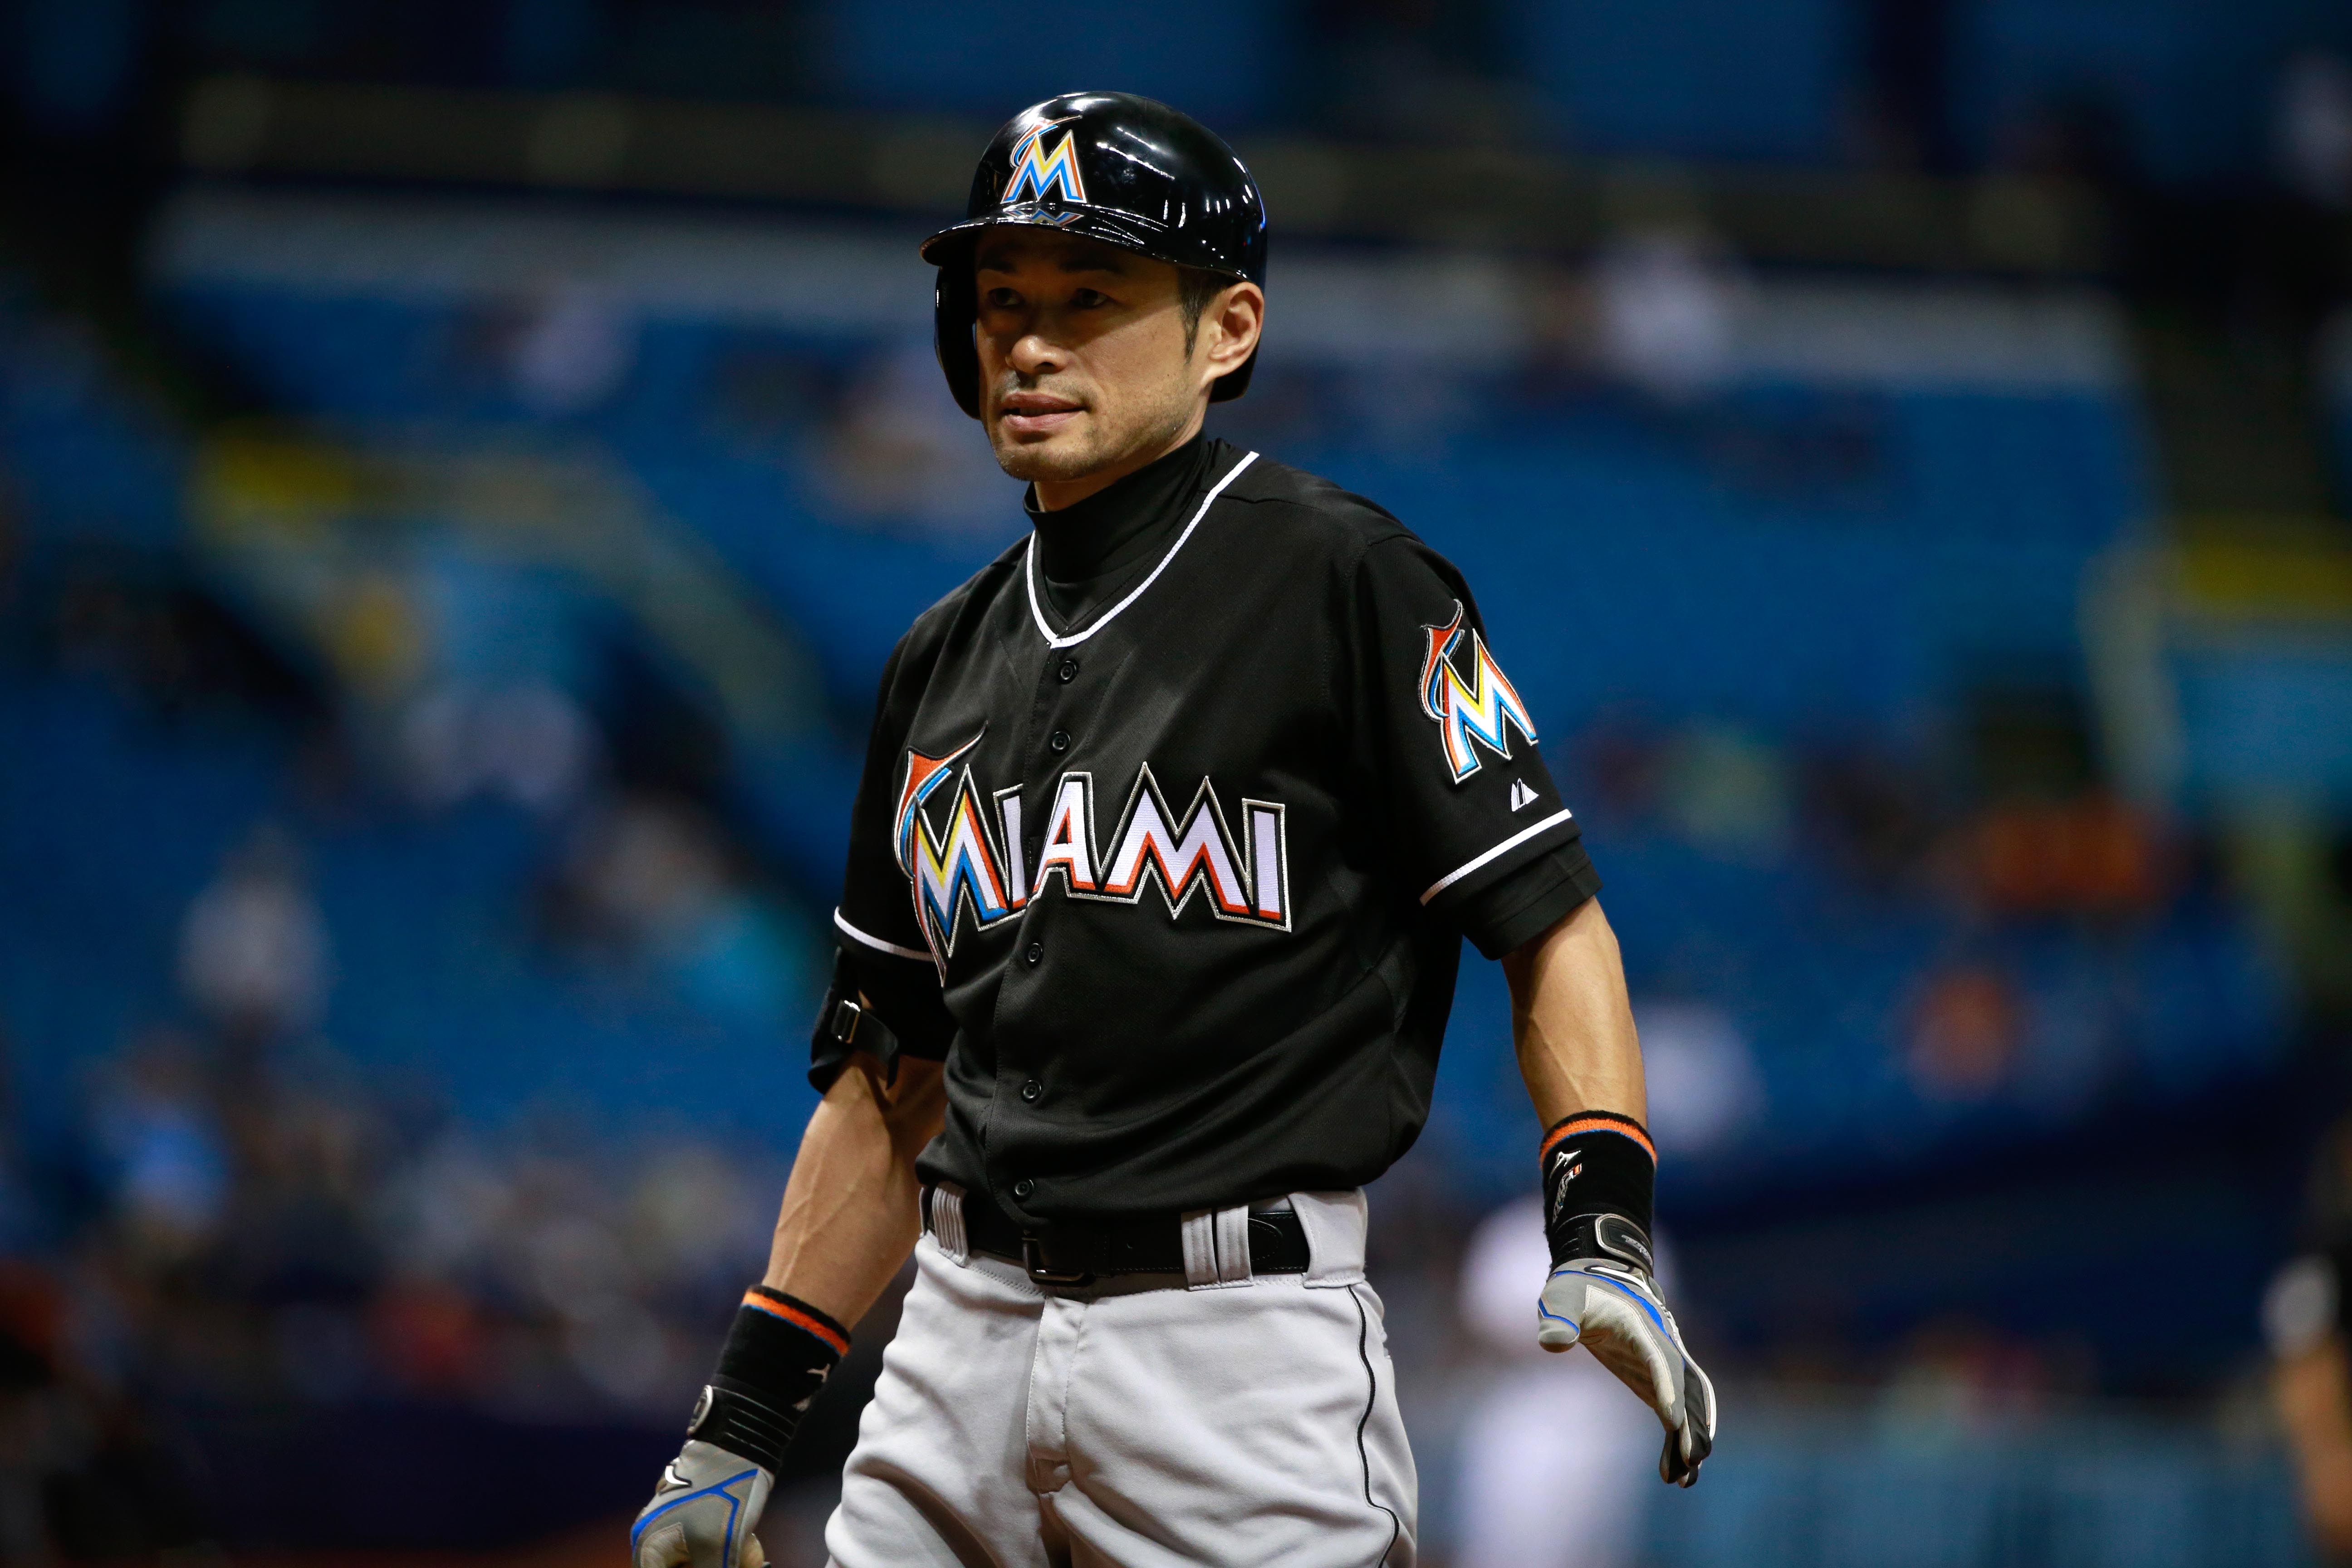 There was an unexpected player exhibiting Ichiro-like qualities in 2015.